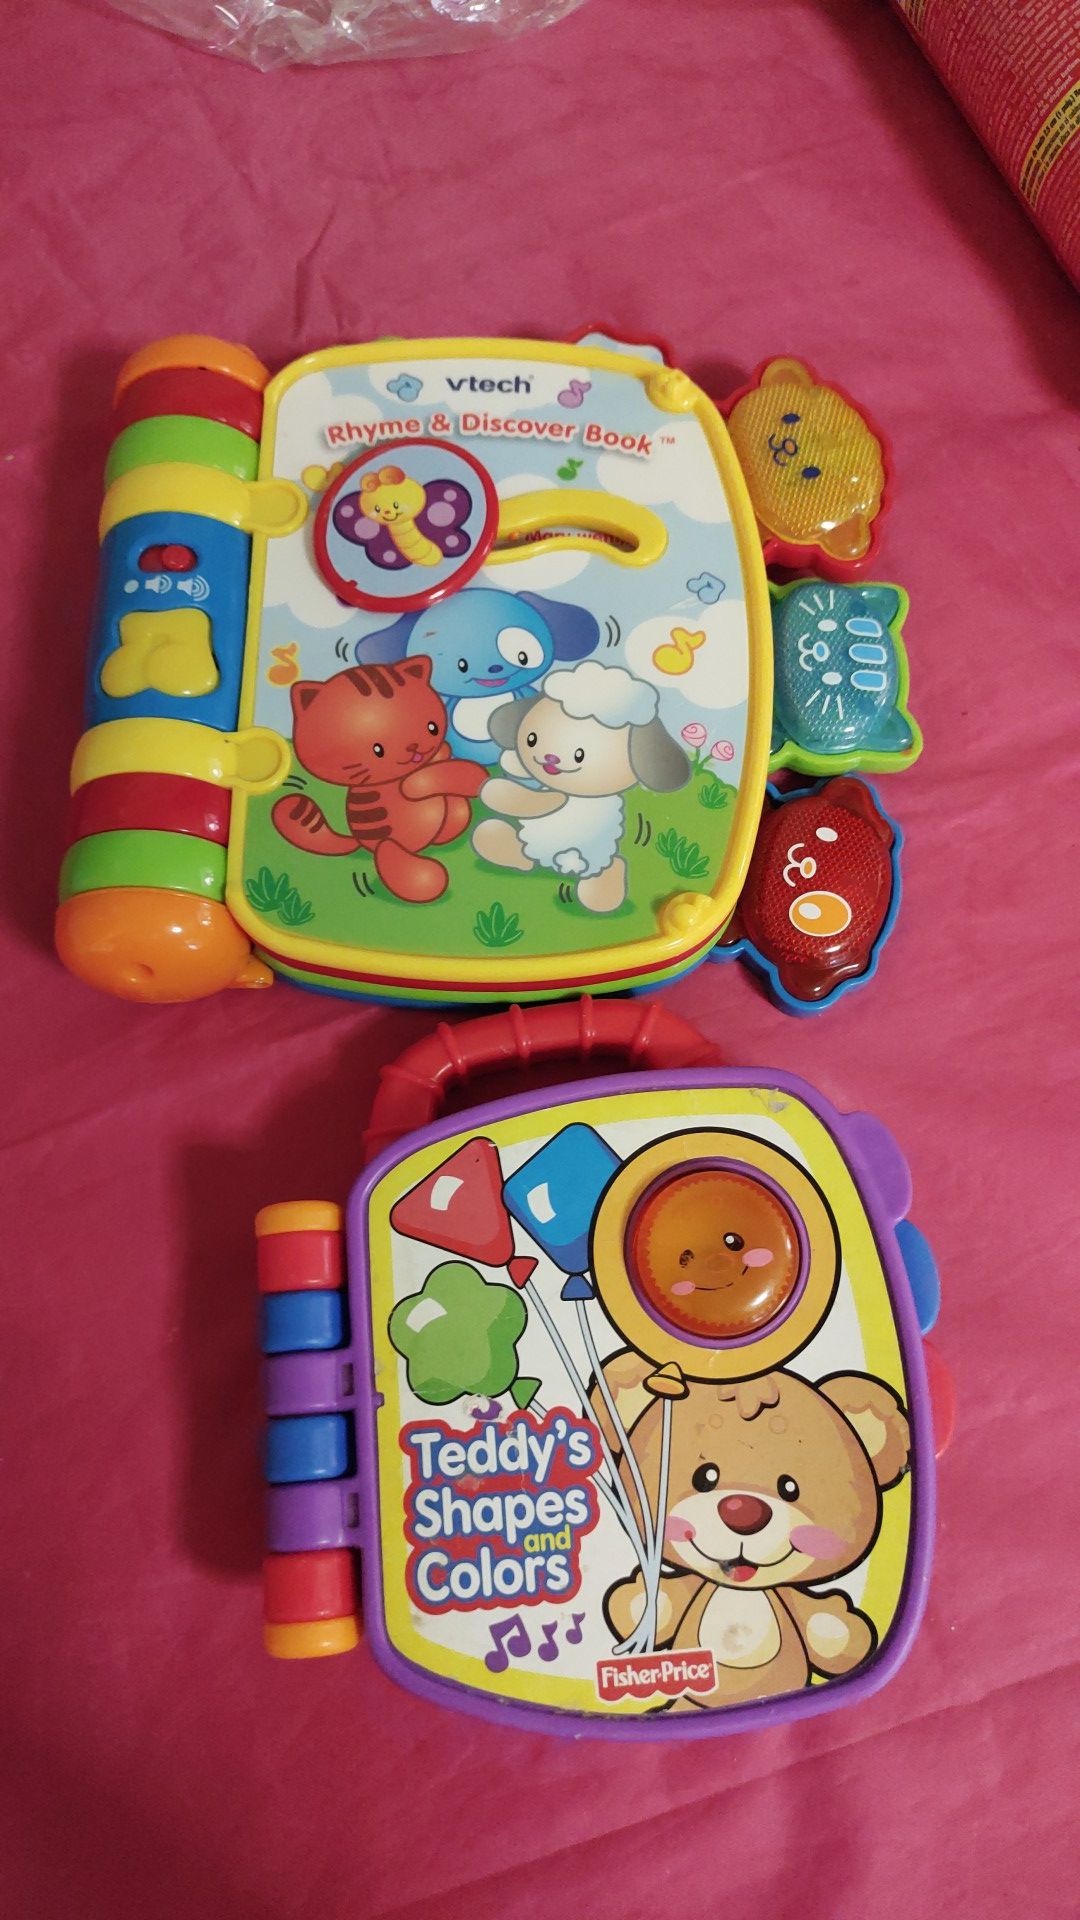 Toys for babies and toddlers..